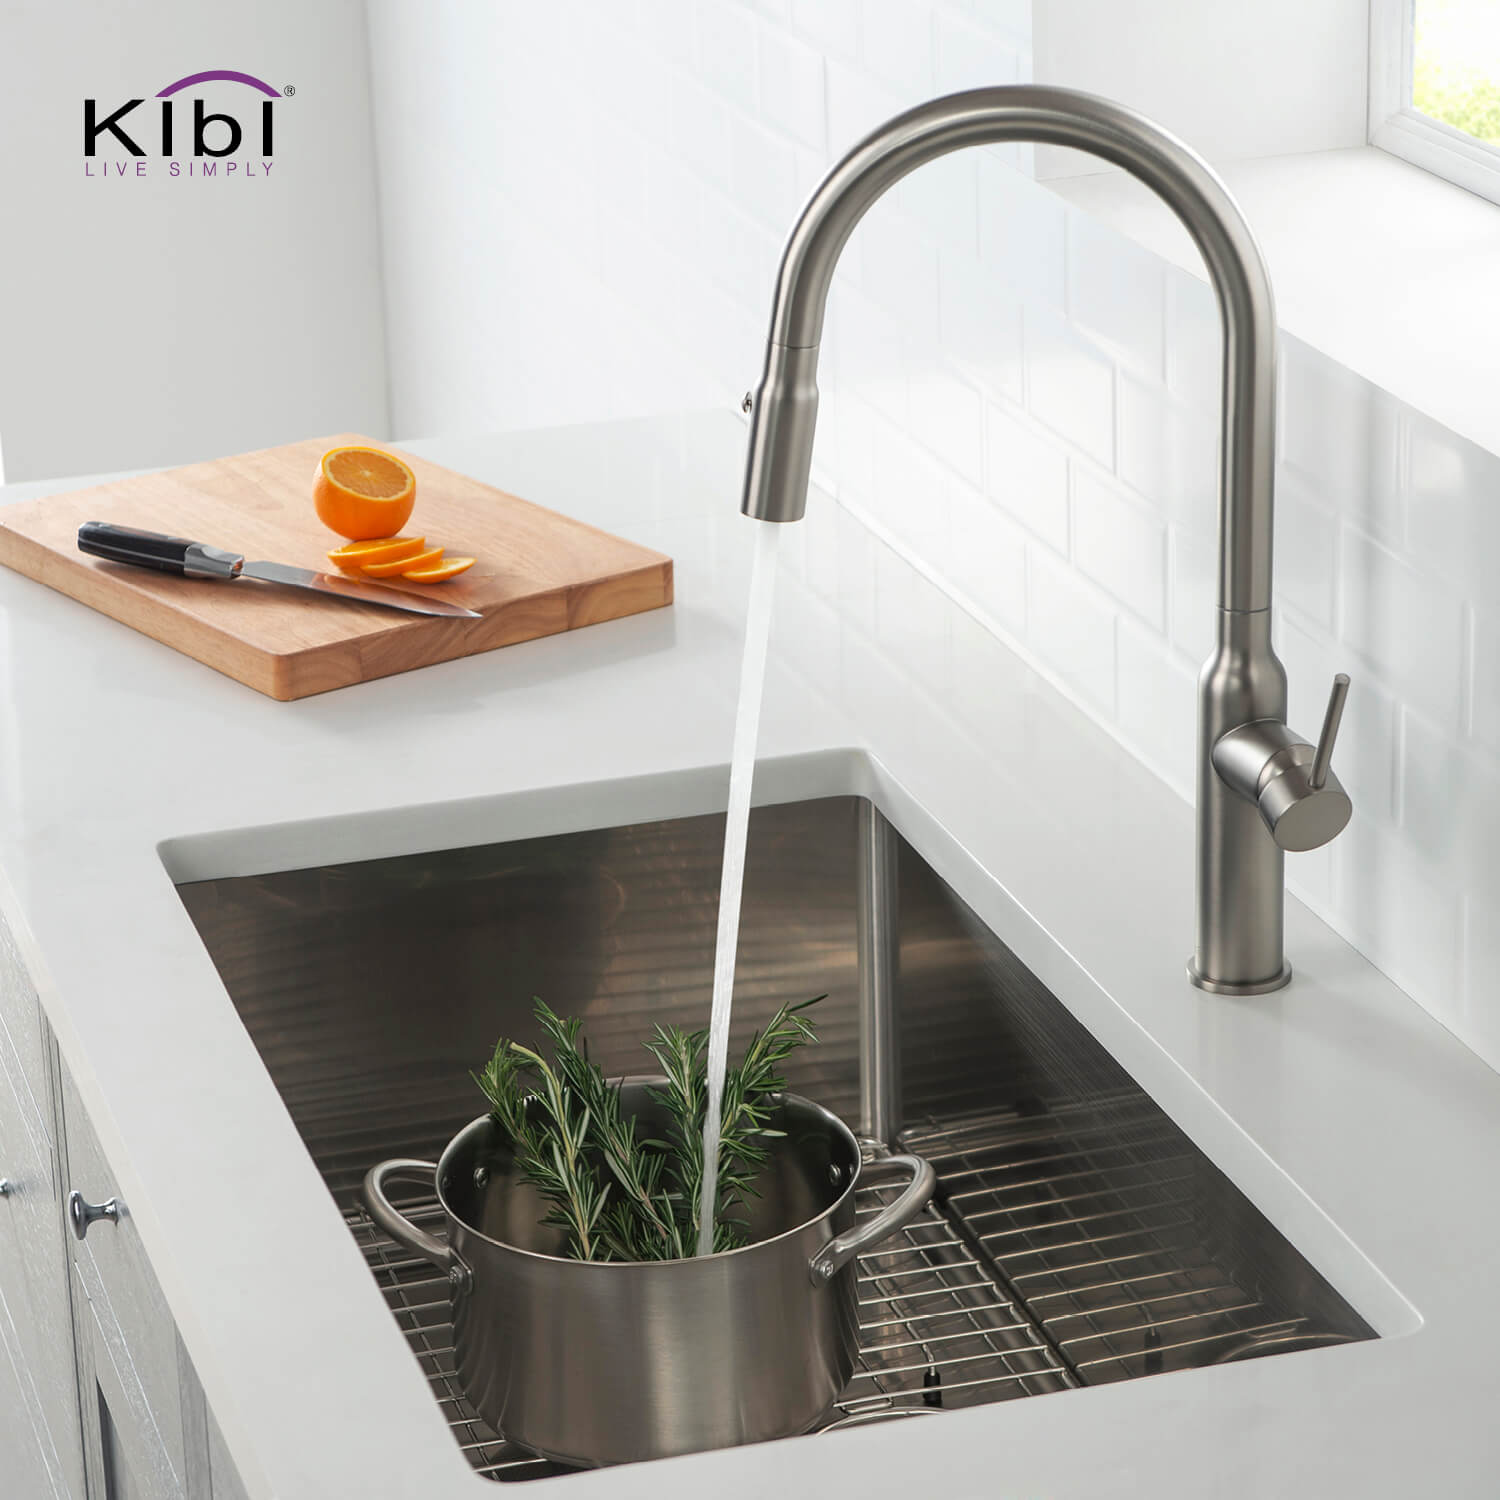 Kibi 32 3/4" x 19" x 10" Handcrafted Undermount Single Bowl Stainless Steel Kitchen Sink With Satin Finish